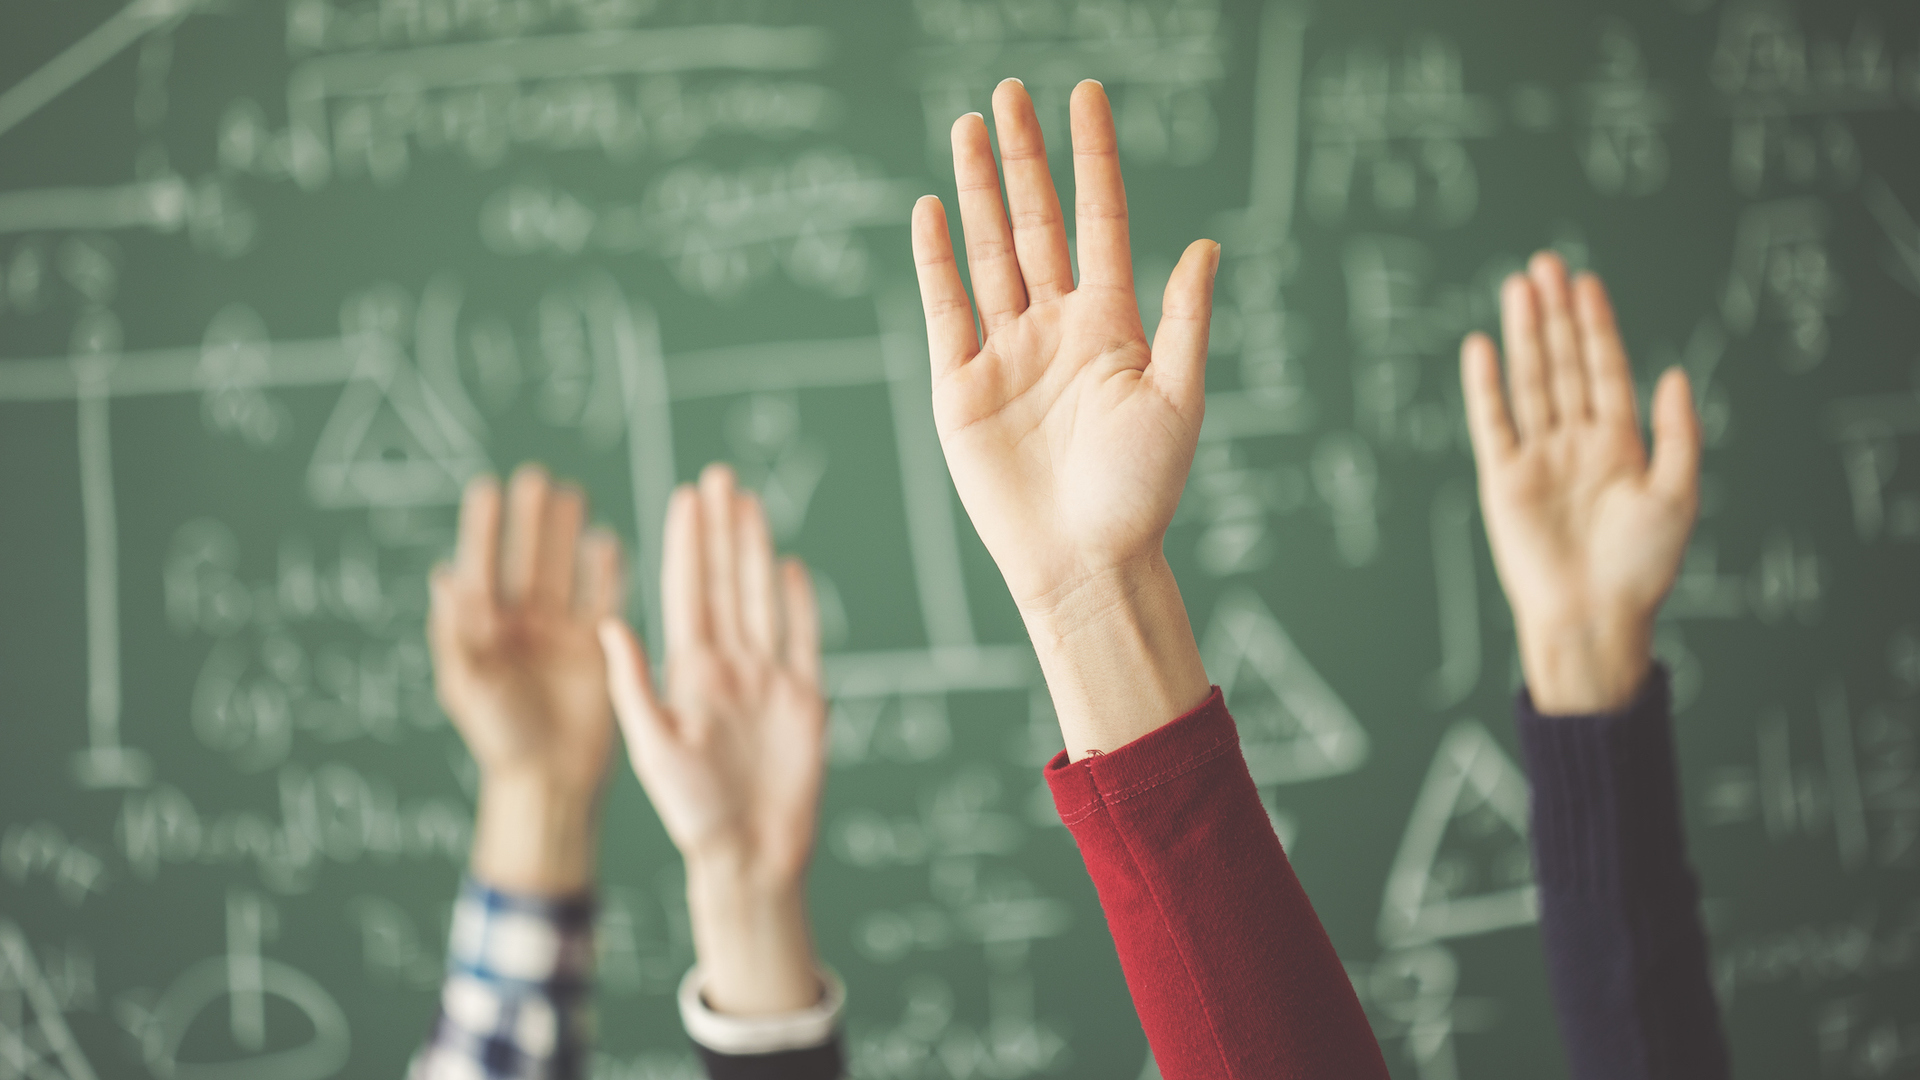 Students raising their hands in a maths lesson